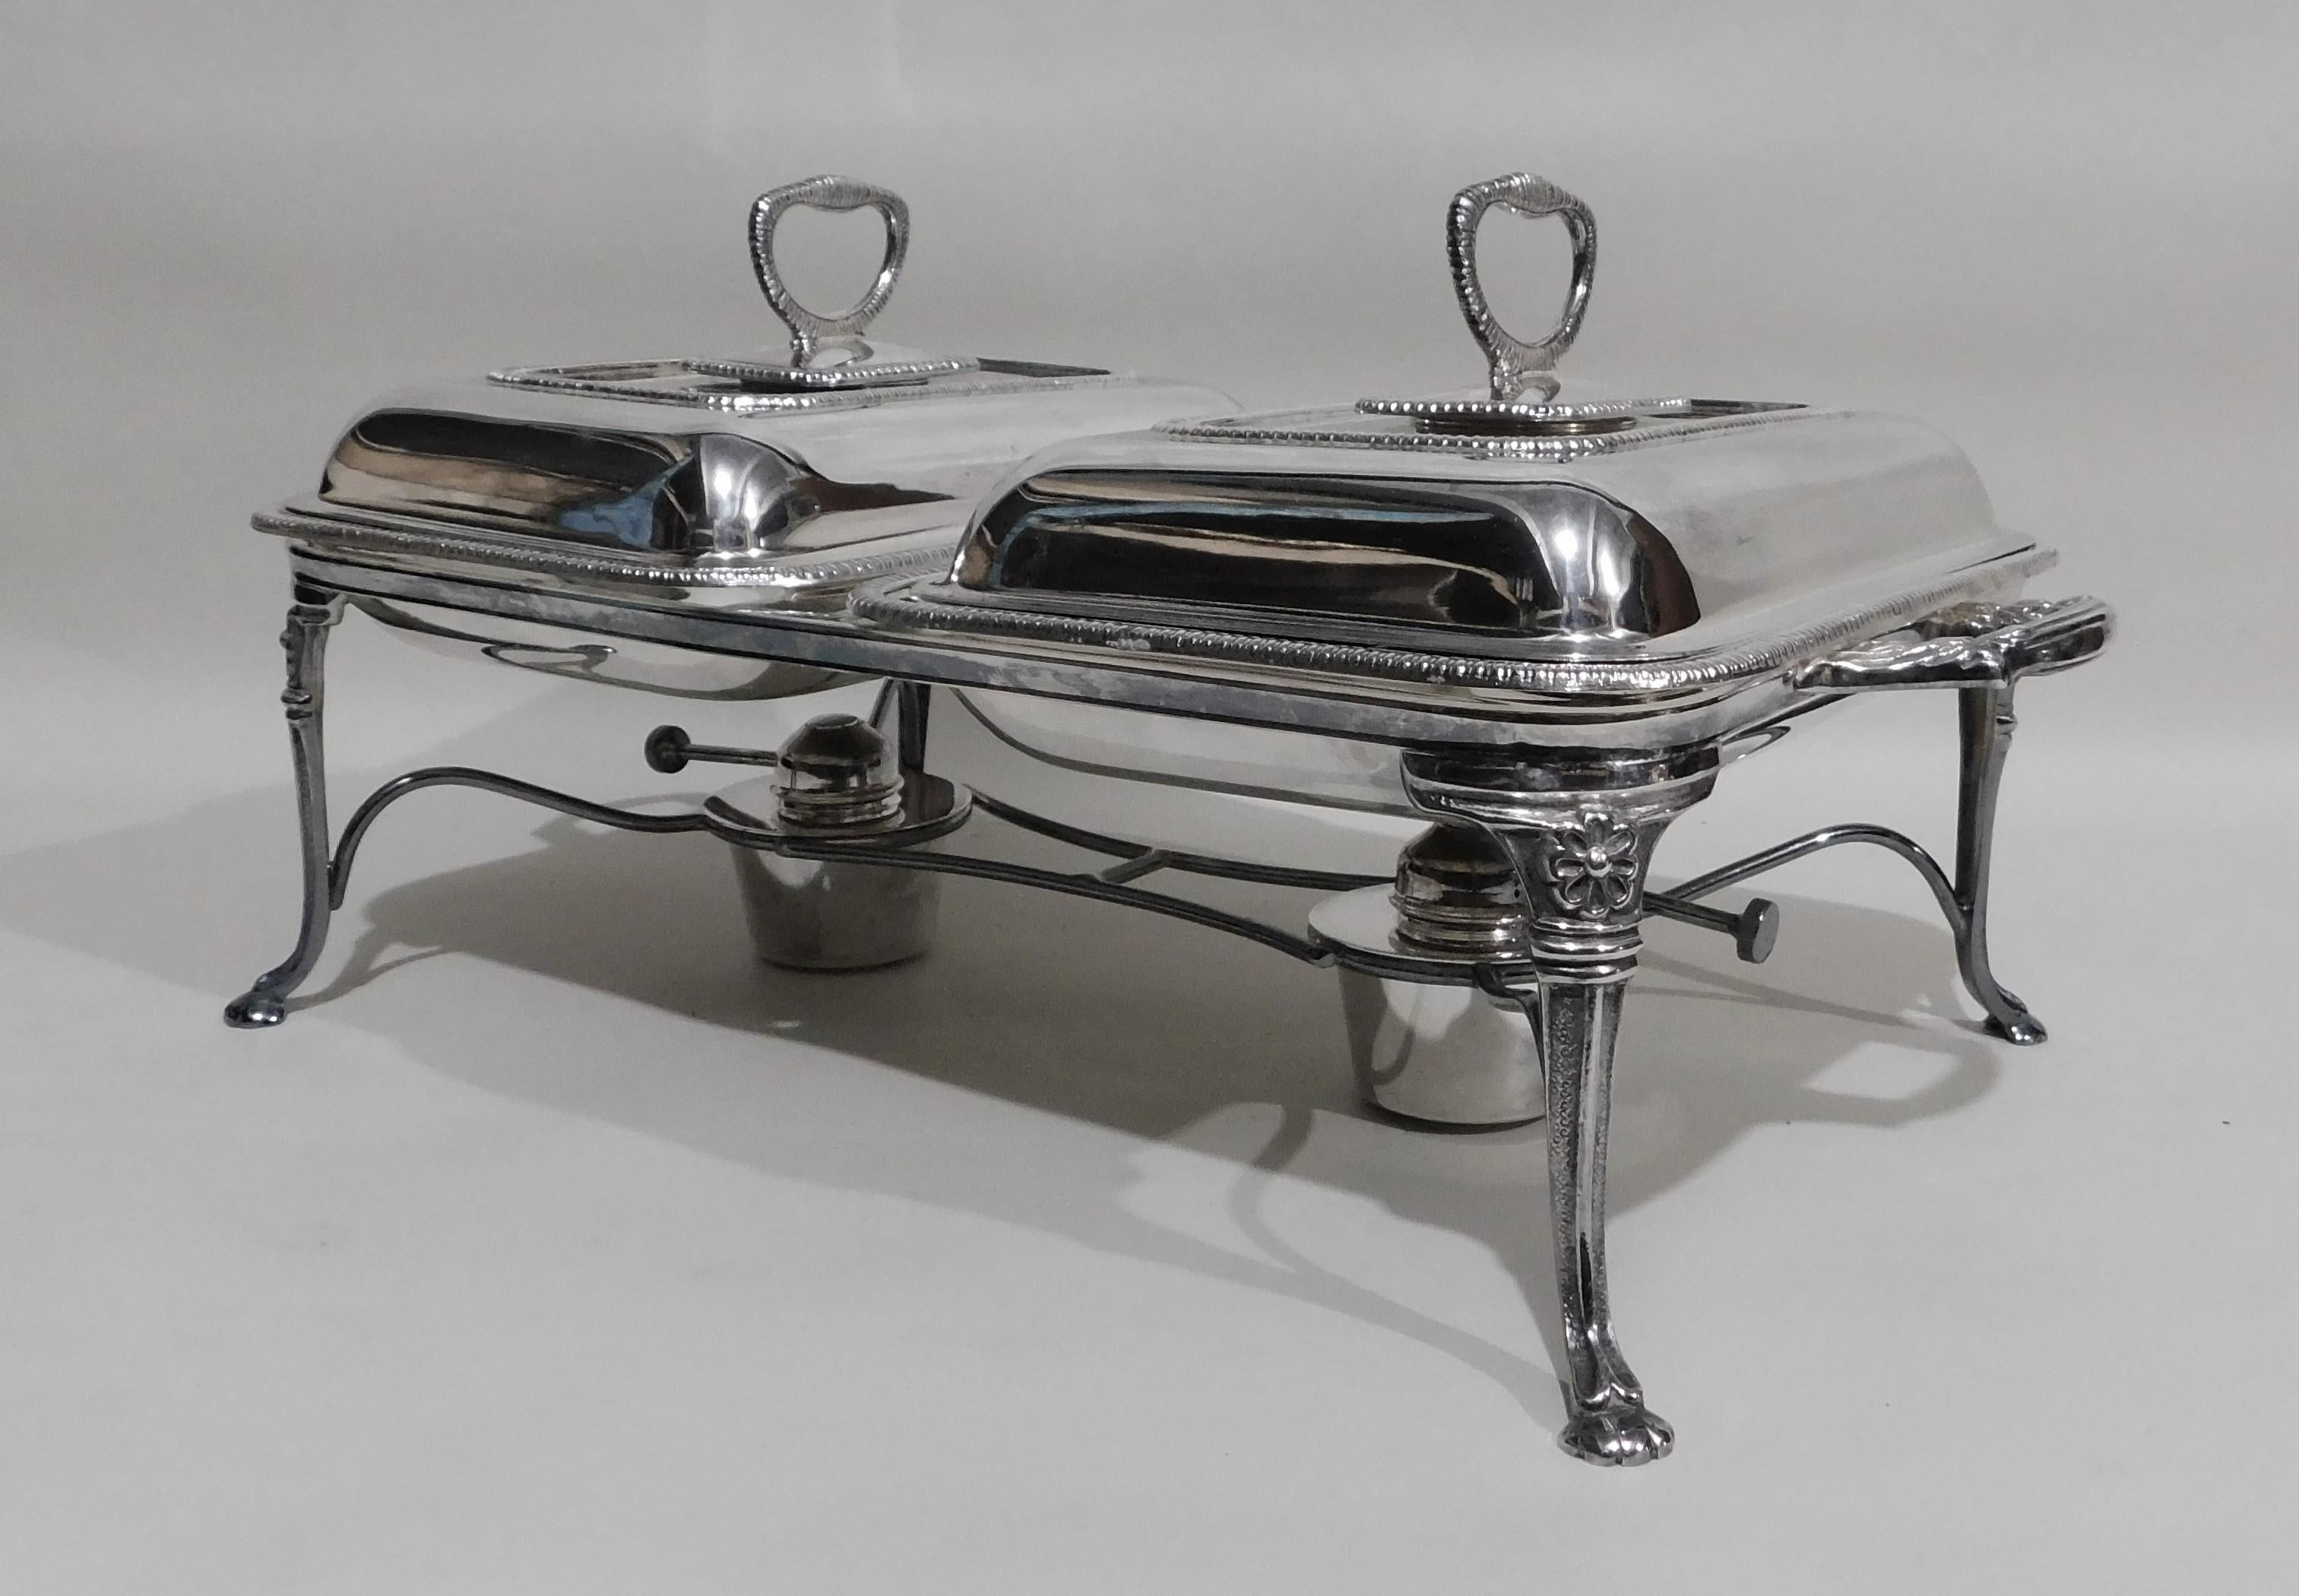 Stamped Yore Plate E.P.N.S. Made in England 8130 silver plated double entree warmer serving dish, circa 1950. Consists of four-footed base, four trays, 2 burners and two handled lids (handles are removable) in very good condition.